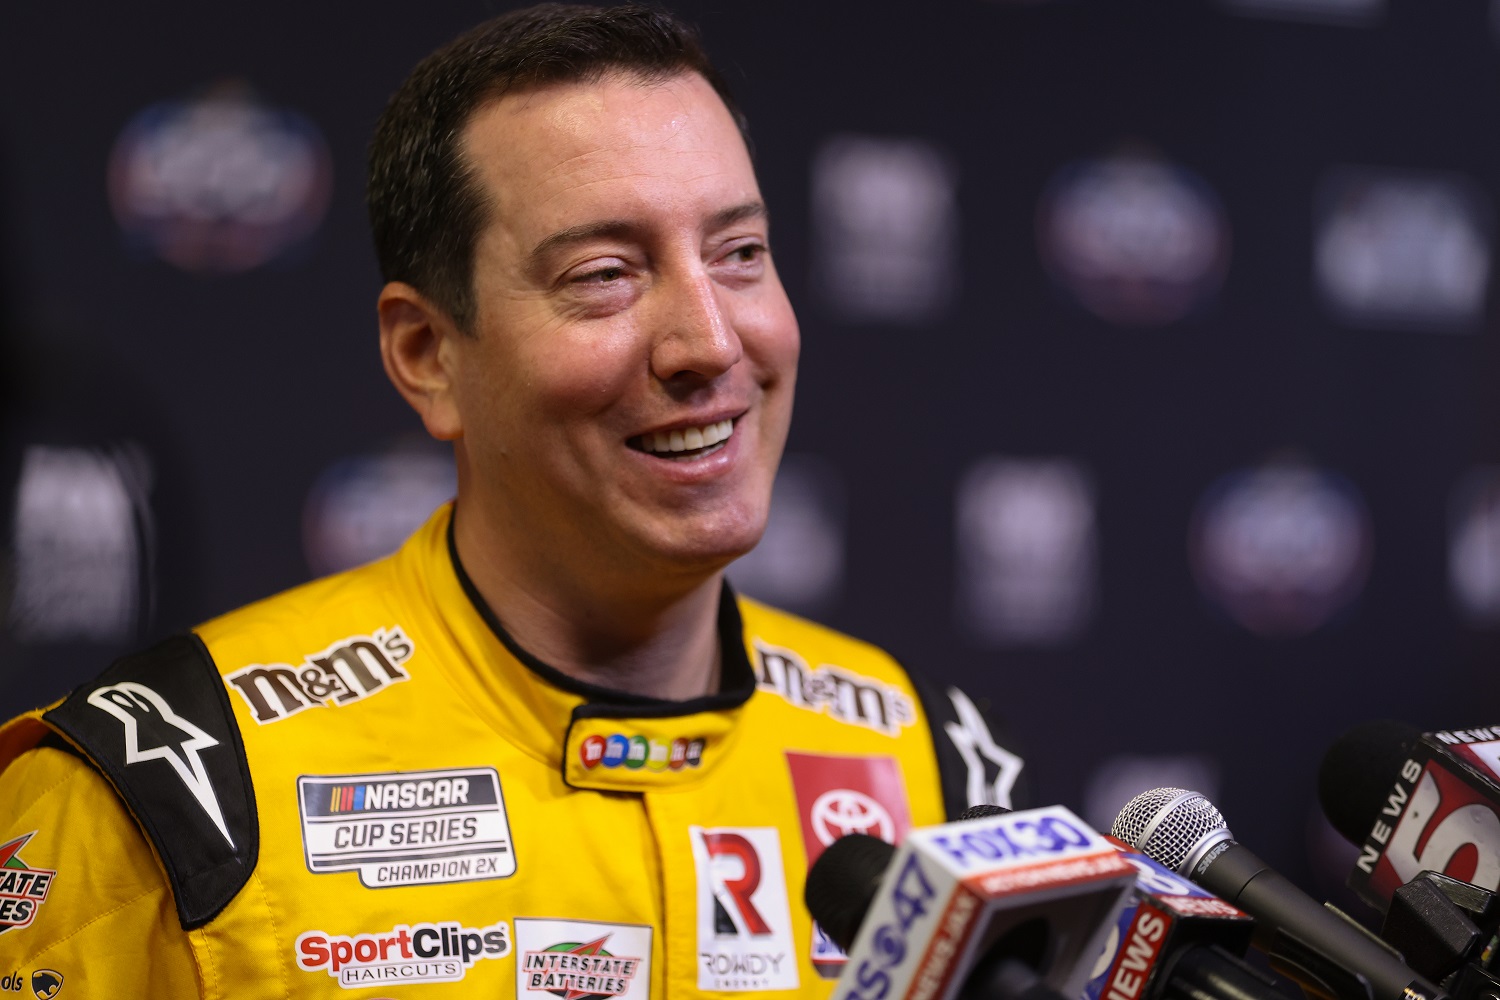 Kyle Busch, driver of the No. 18 Toyota, speaks to the media during the NASCAR Cup Series Daytona 500 Media Day at Daytona International Speedway on Feb. 16, 2022. | James Gilbert/Getty Images